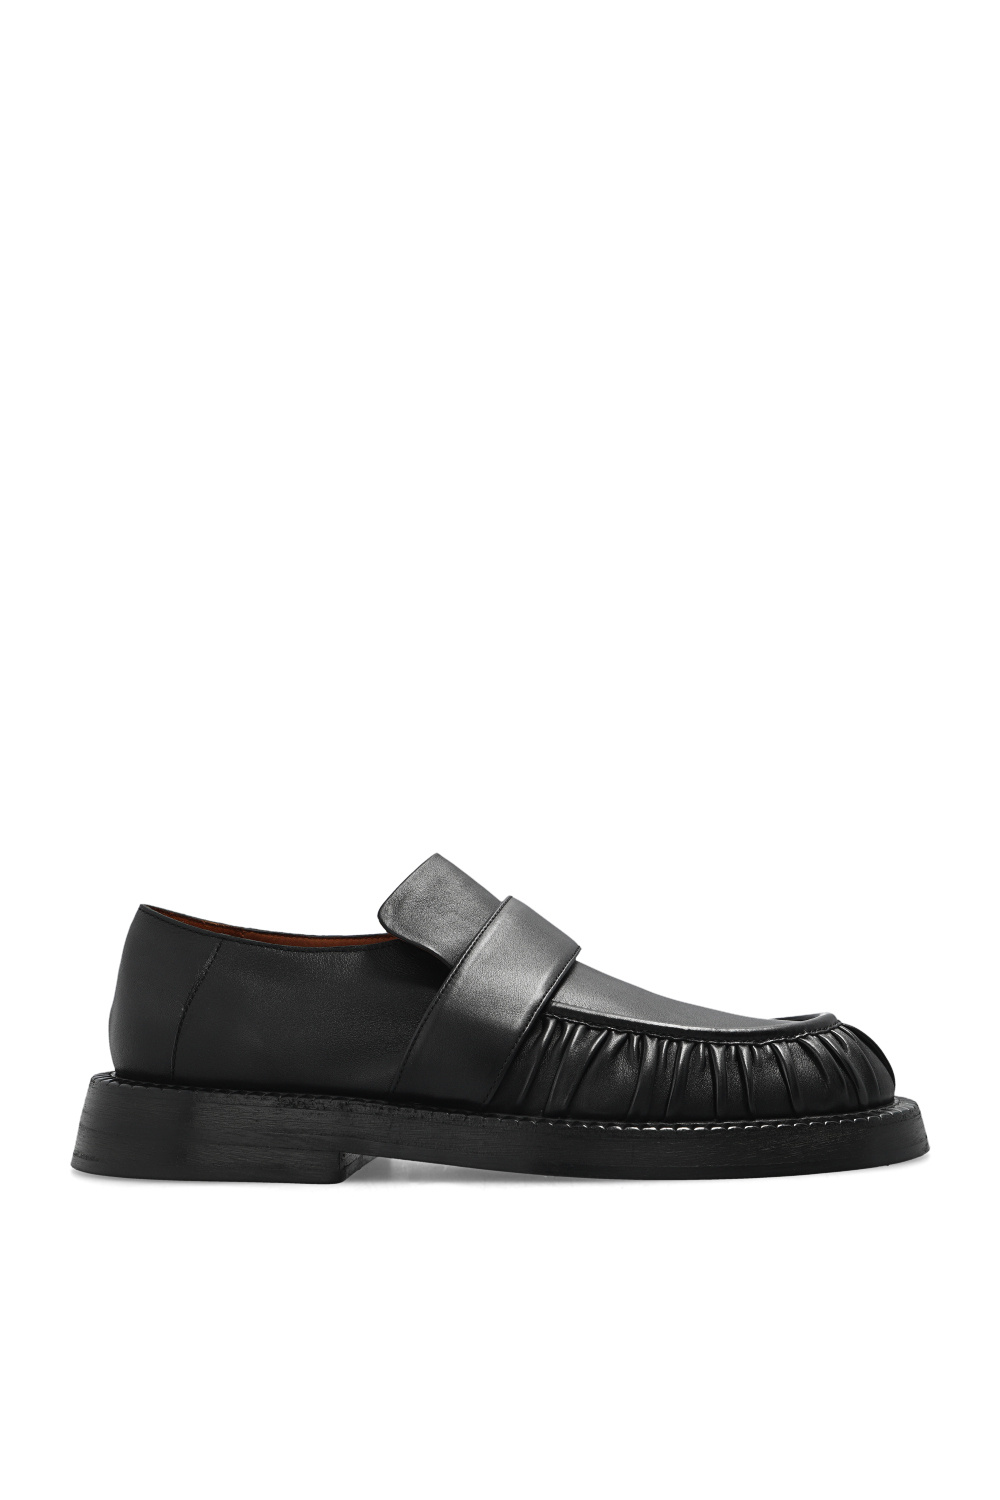 Marsell ‘Alluce’ leather shoes